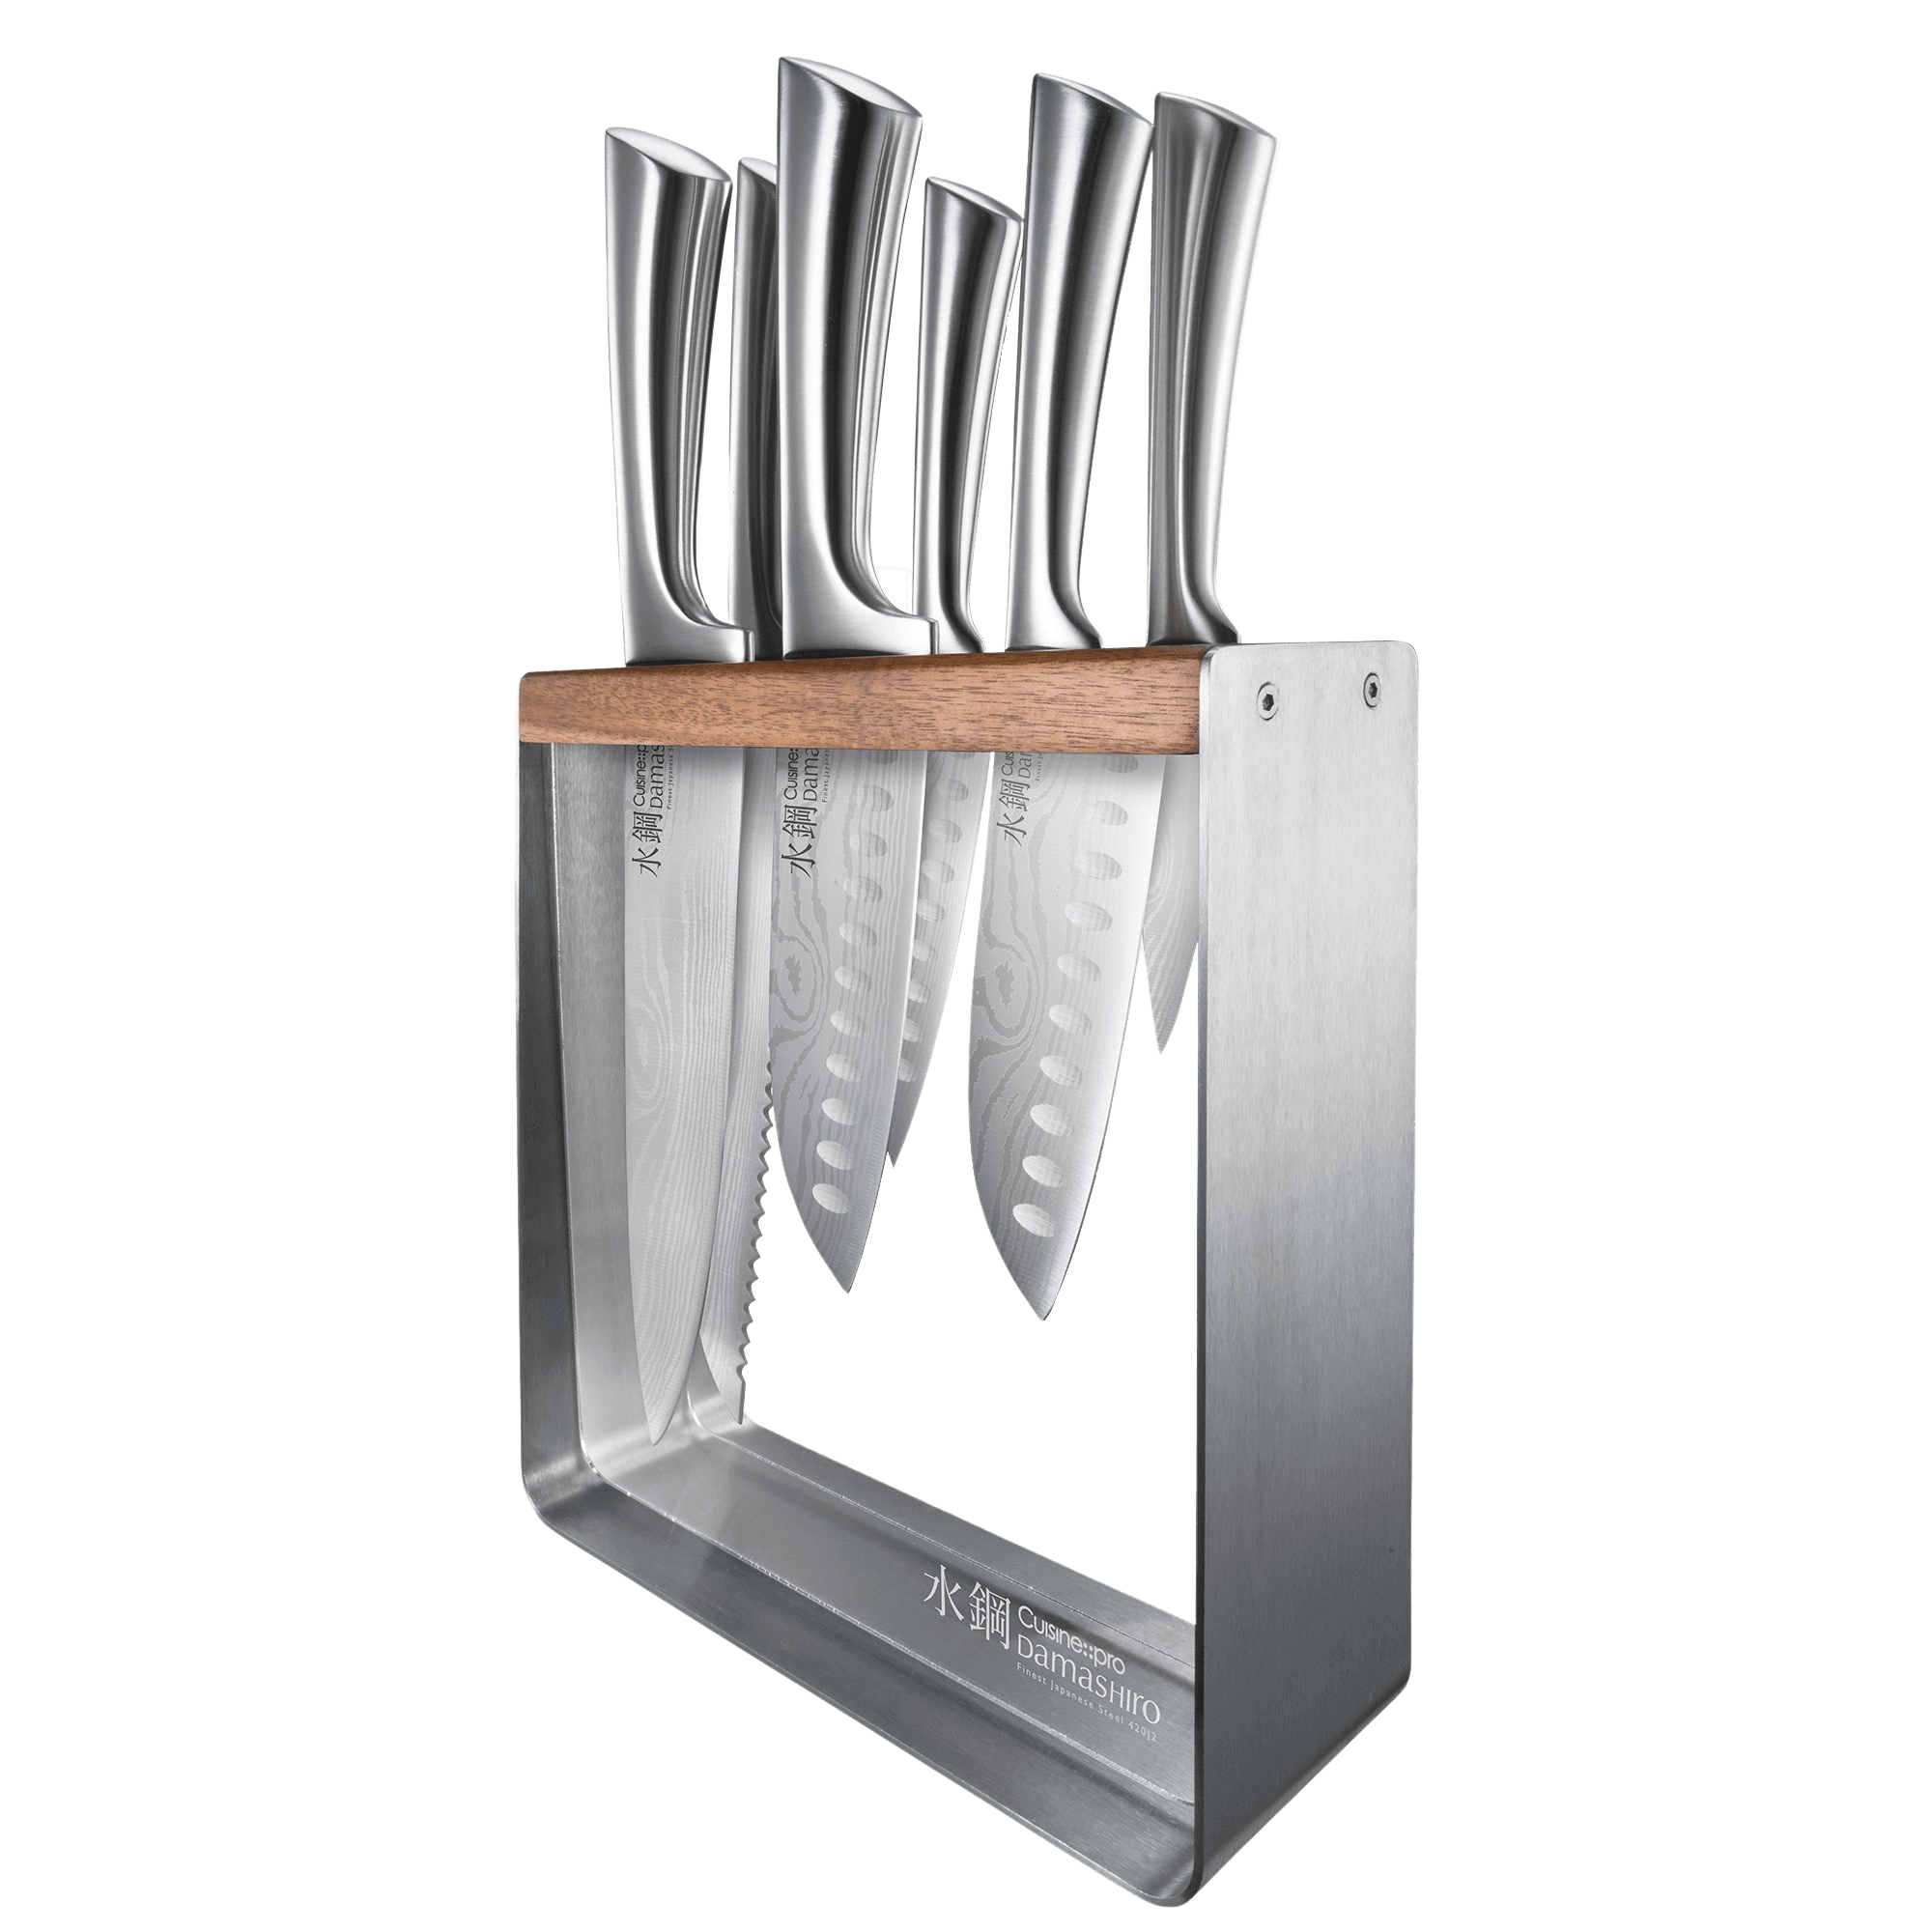 DFITO 9-Piece Kitchen Knife Set, Stainless Steel Professional Cutlery Knife  with Knife Sheaths, Ultra Sharp Kitchen Knives with Knife Storage Bag, Blue  